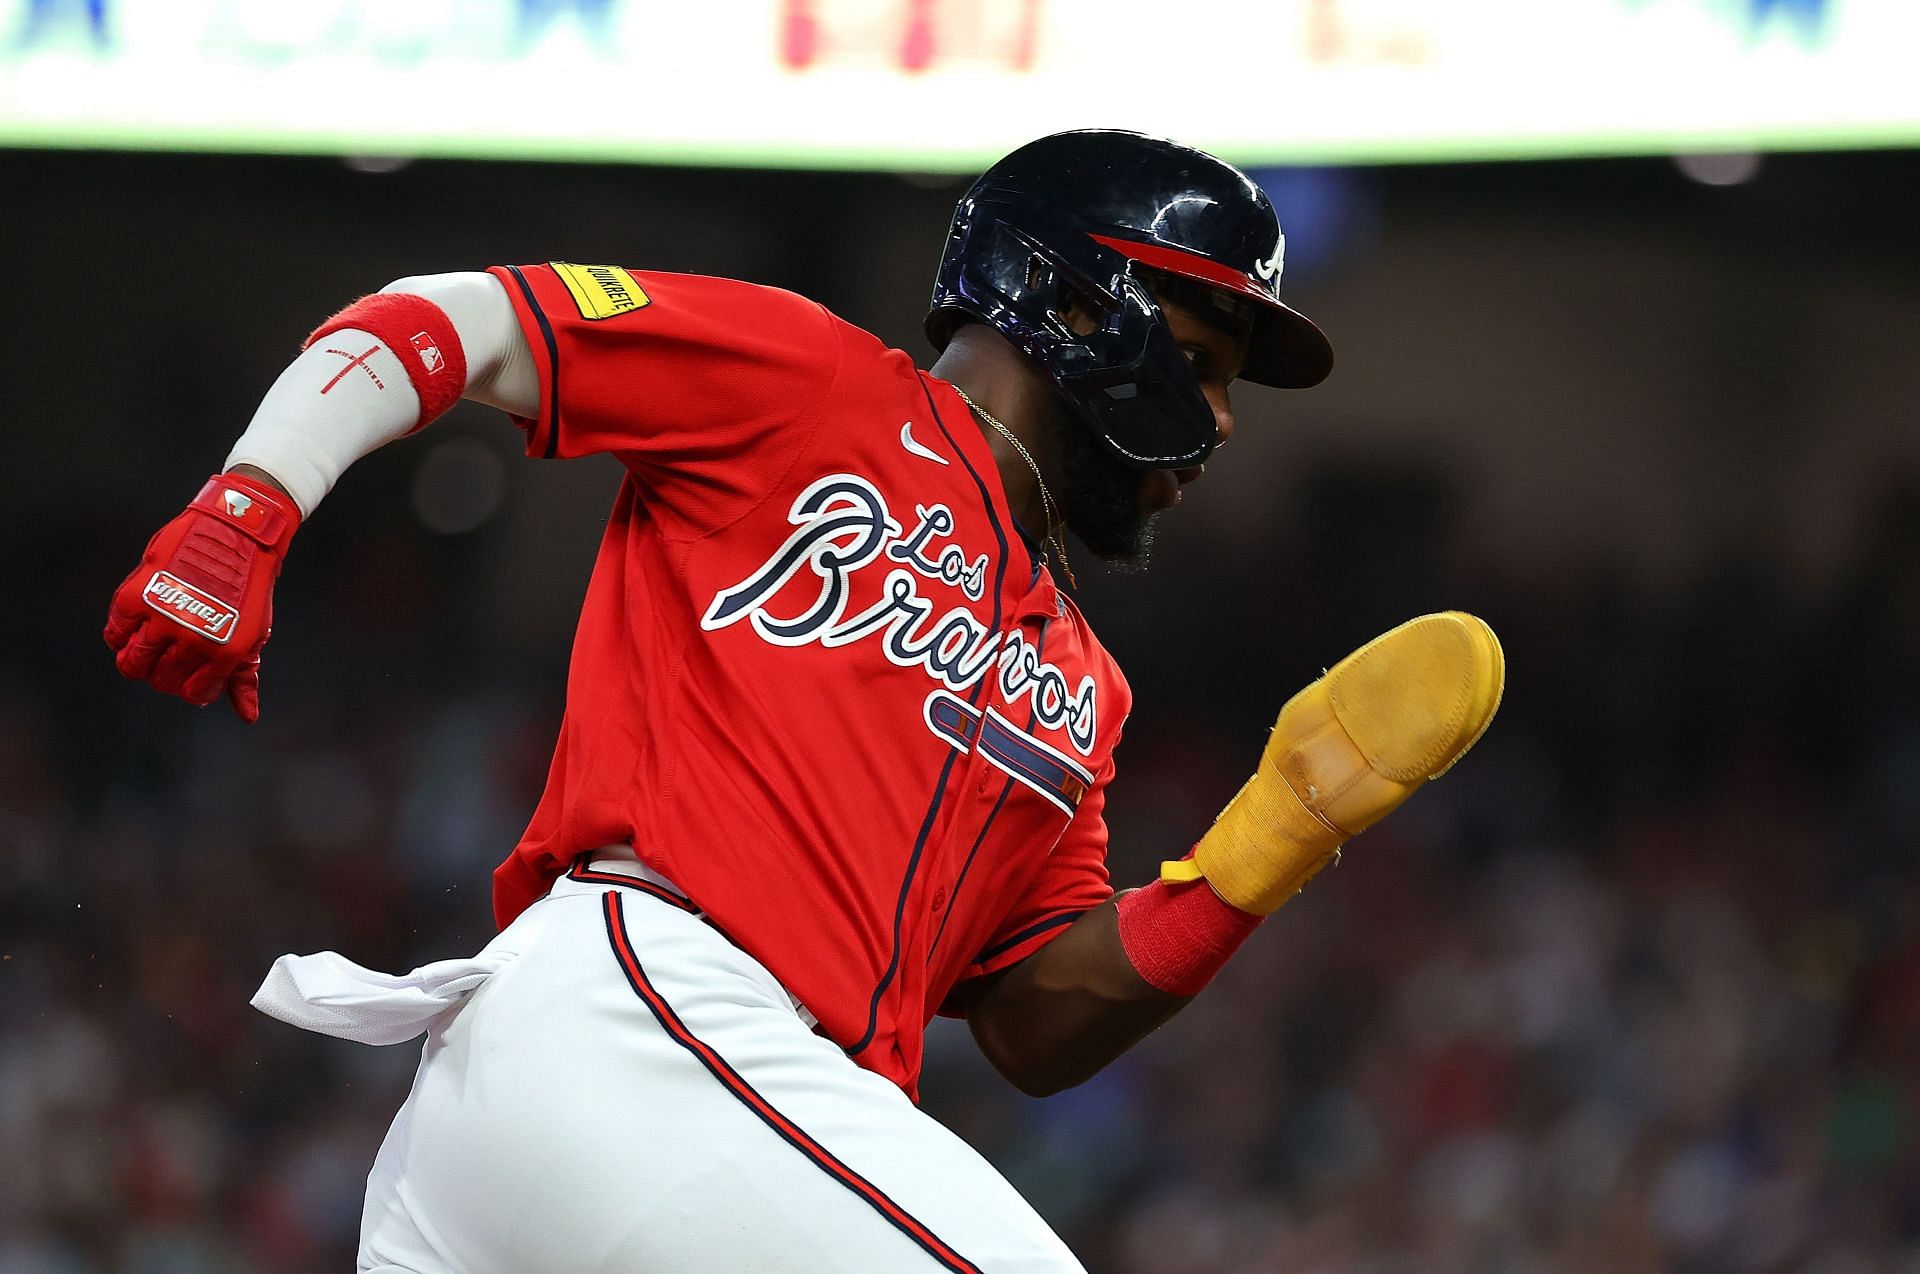 Ronald Acuna Jr. and Matt Olson have been standout performers with both players putting up MVP-caliber seasons.